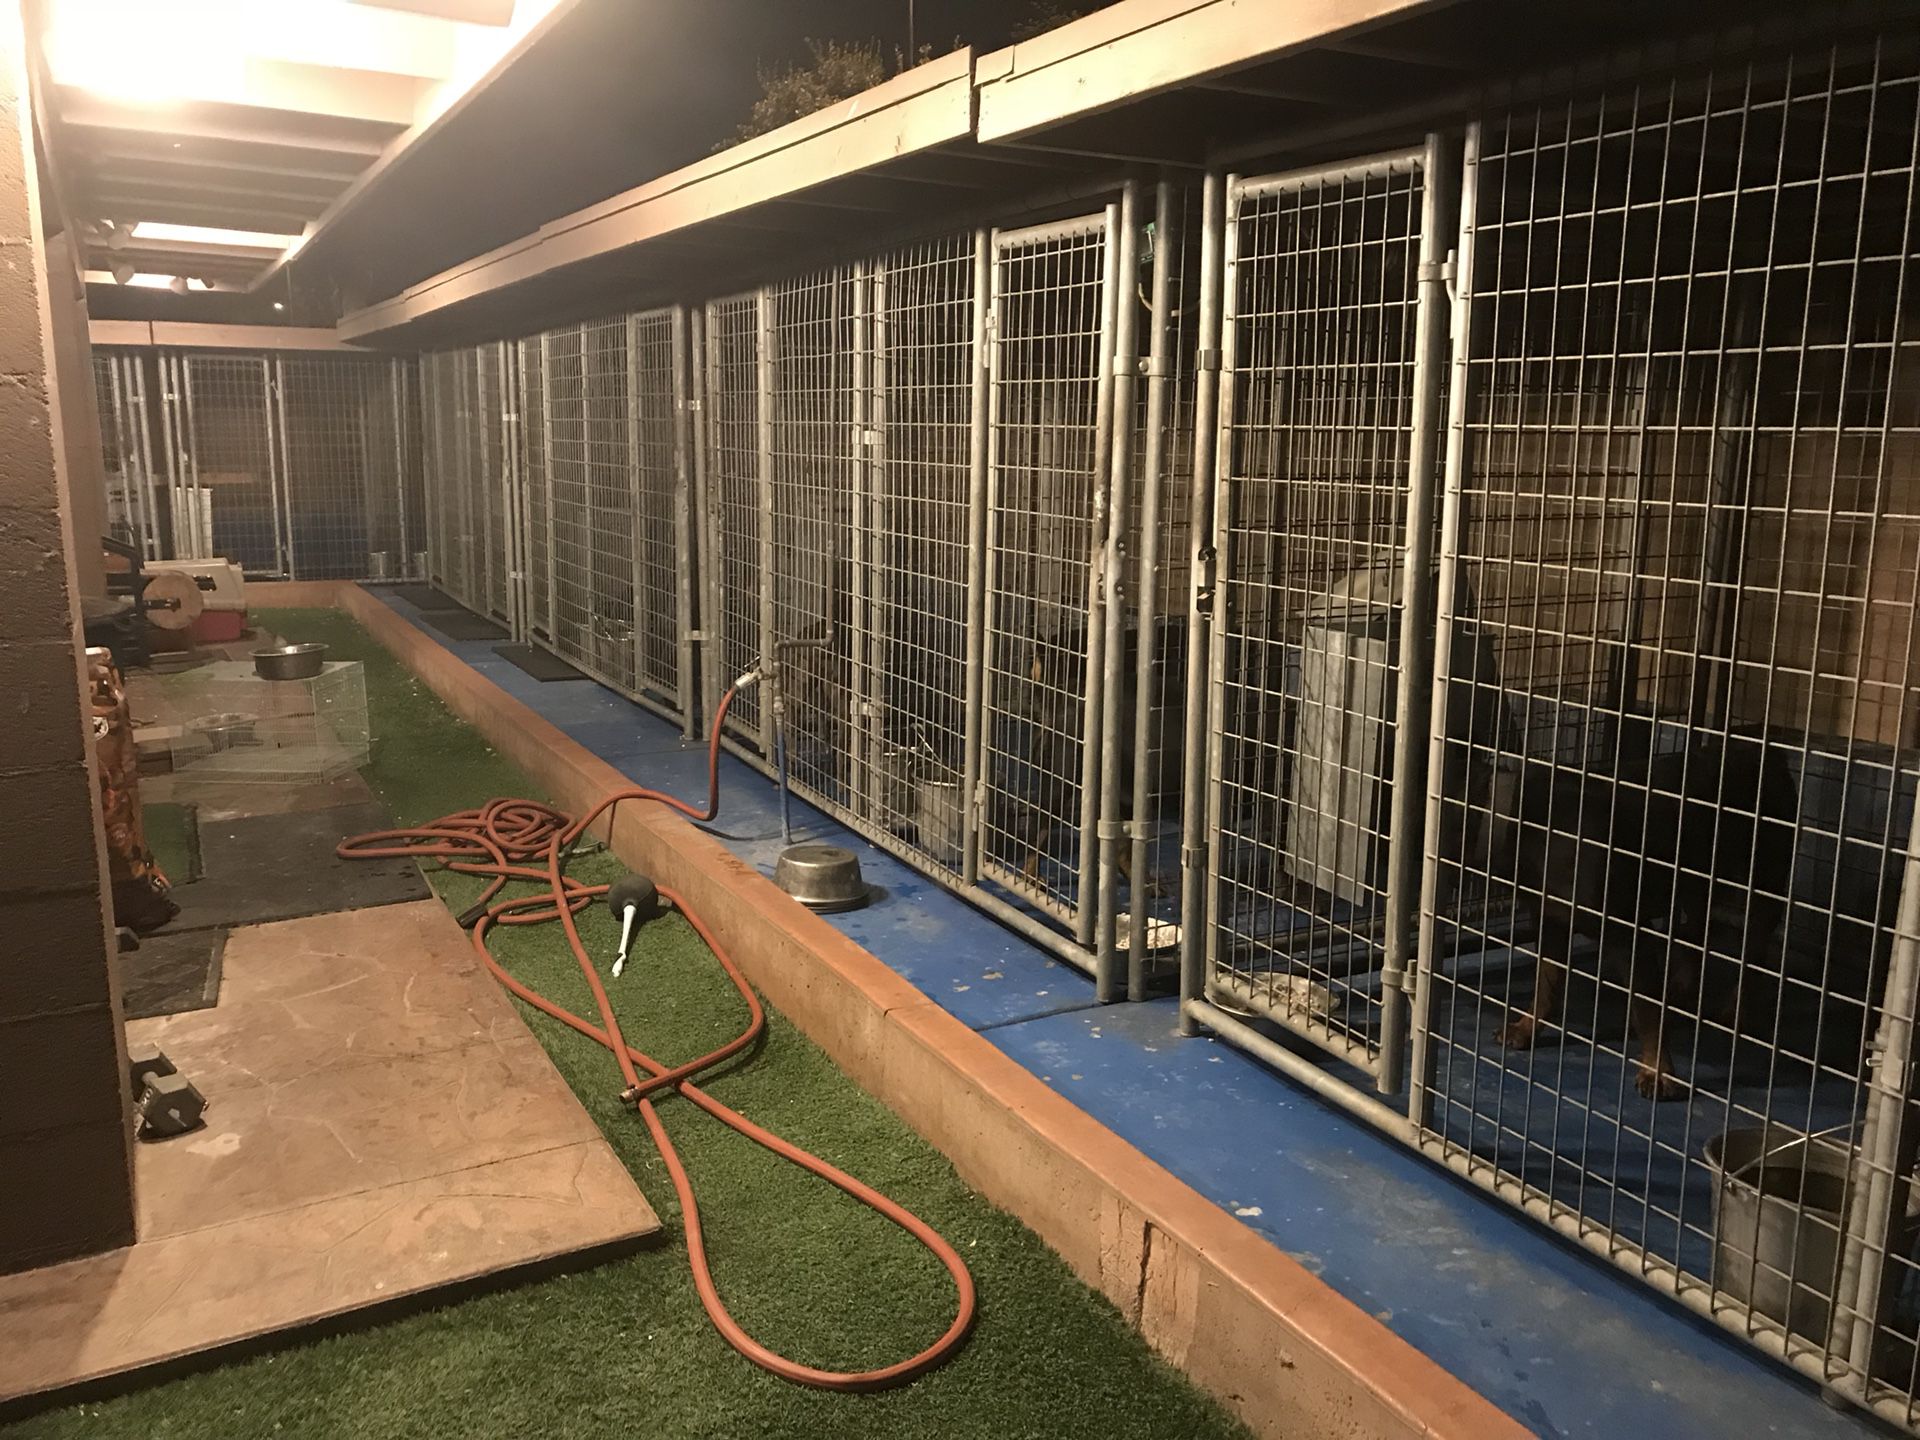 Every kennel is sold separately, 6 gauge, 6x10x5, comes with divider